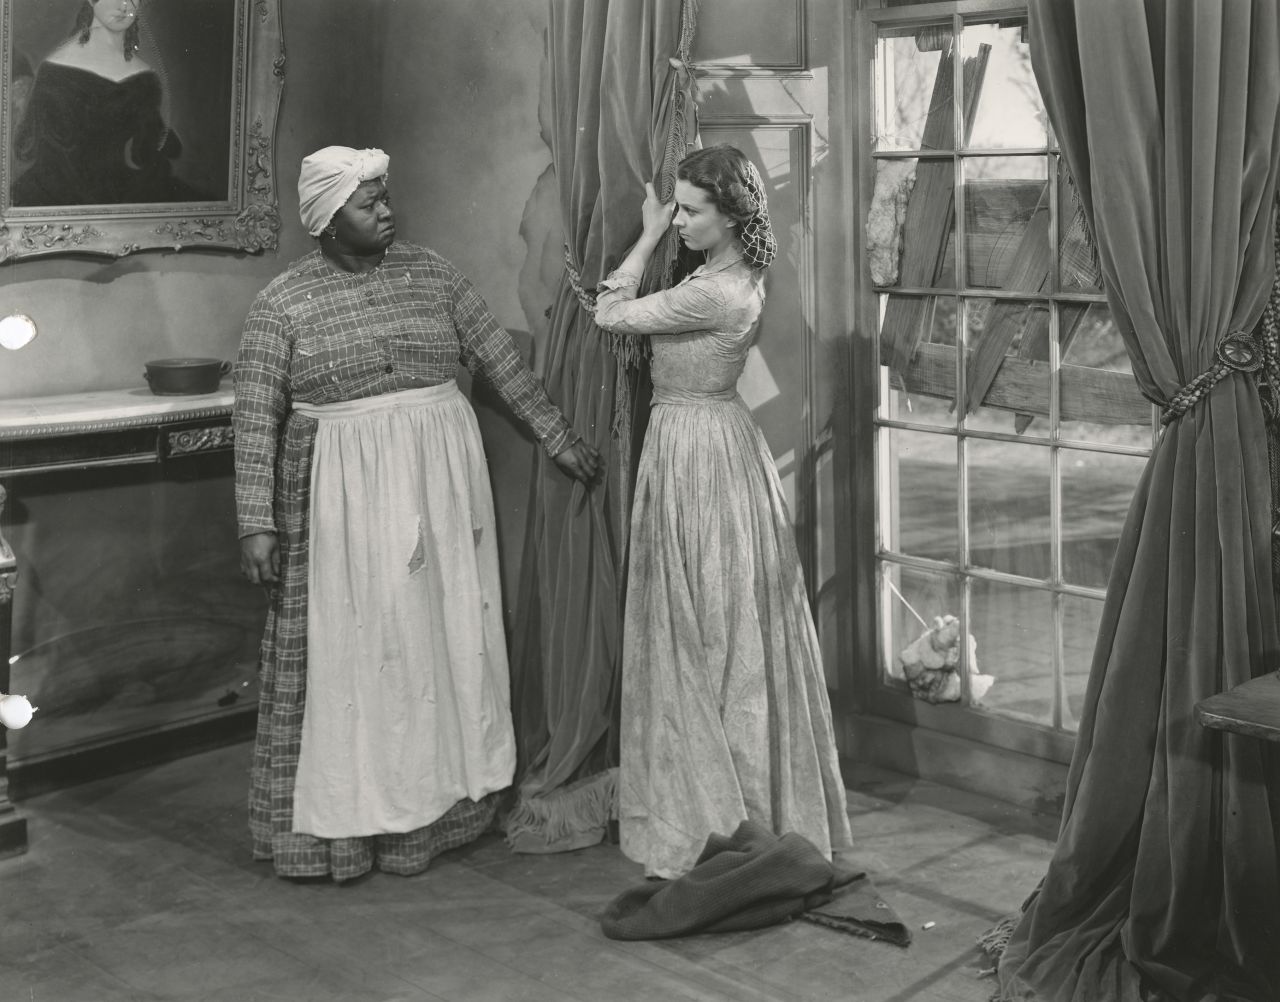 In an iconic scene from the movie, Scarlett (Vivien Leigh) yanks down her mother's curtains for Mammy (Hattie McDaniel) to make a fancy dress to impress Rhett Butler and try to persuade him to give her $300 to pay the taxes on her plantation. "The curtain dress has a special place in everyone's hearts," says Jill Morena, the Ransom Center's assistant curator for costumes and personal effects.